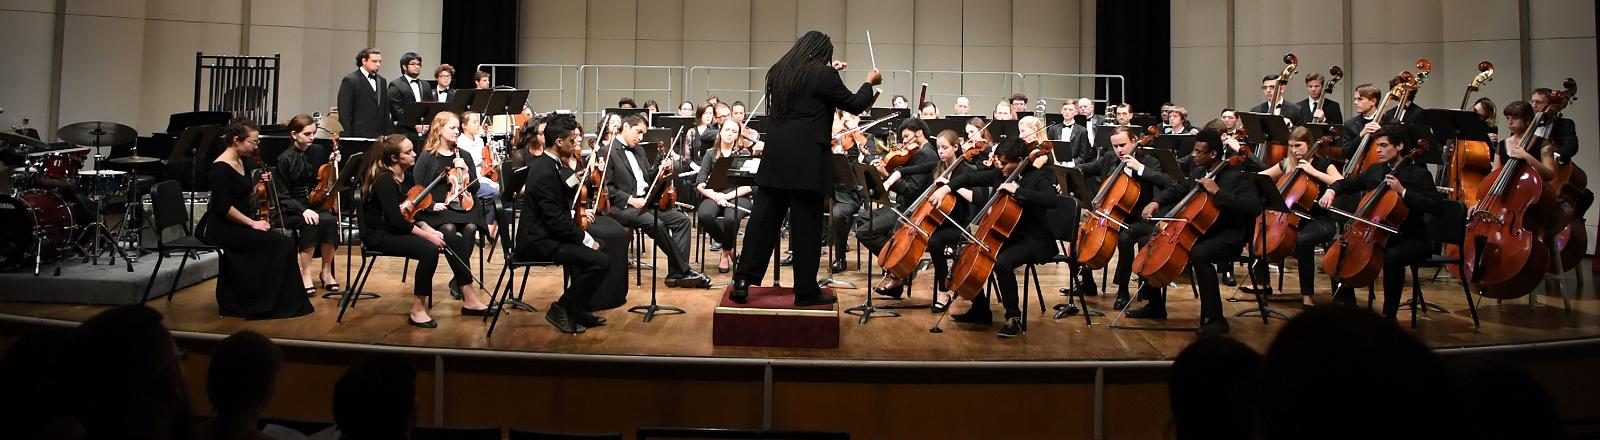 Dr. Montes directing the orchestra in concert 